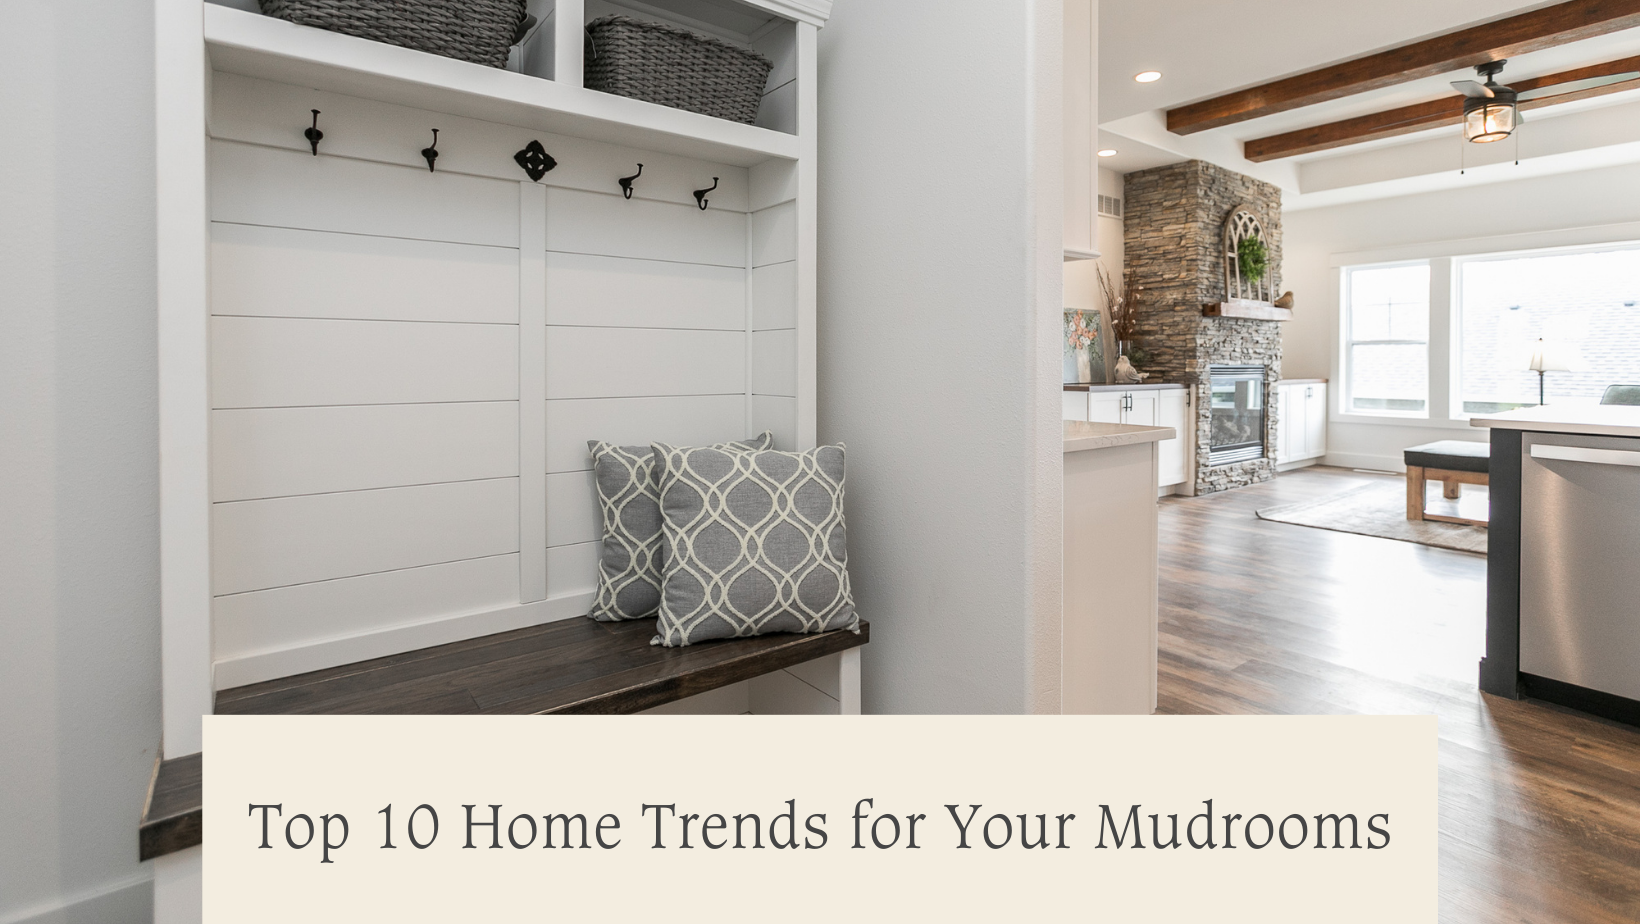 Top 10 Home Design Trends for your Mudrooms